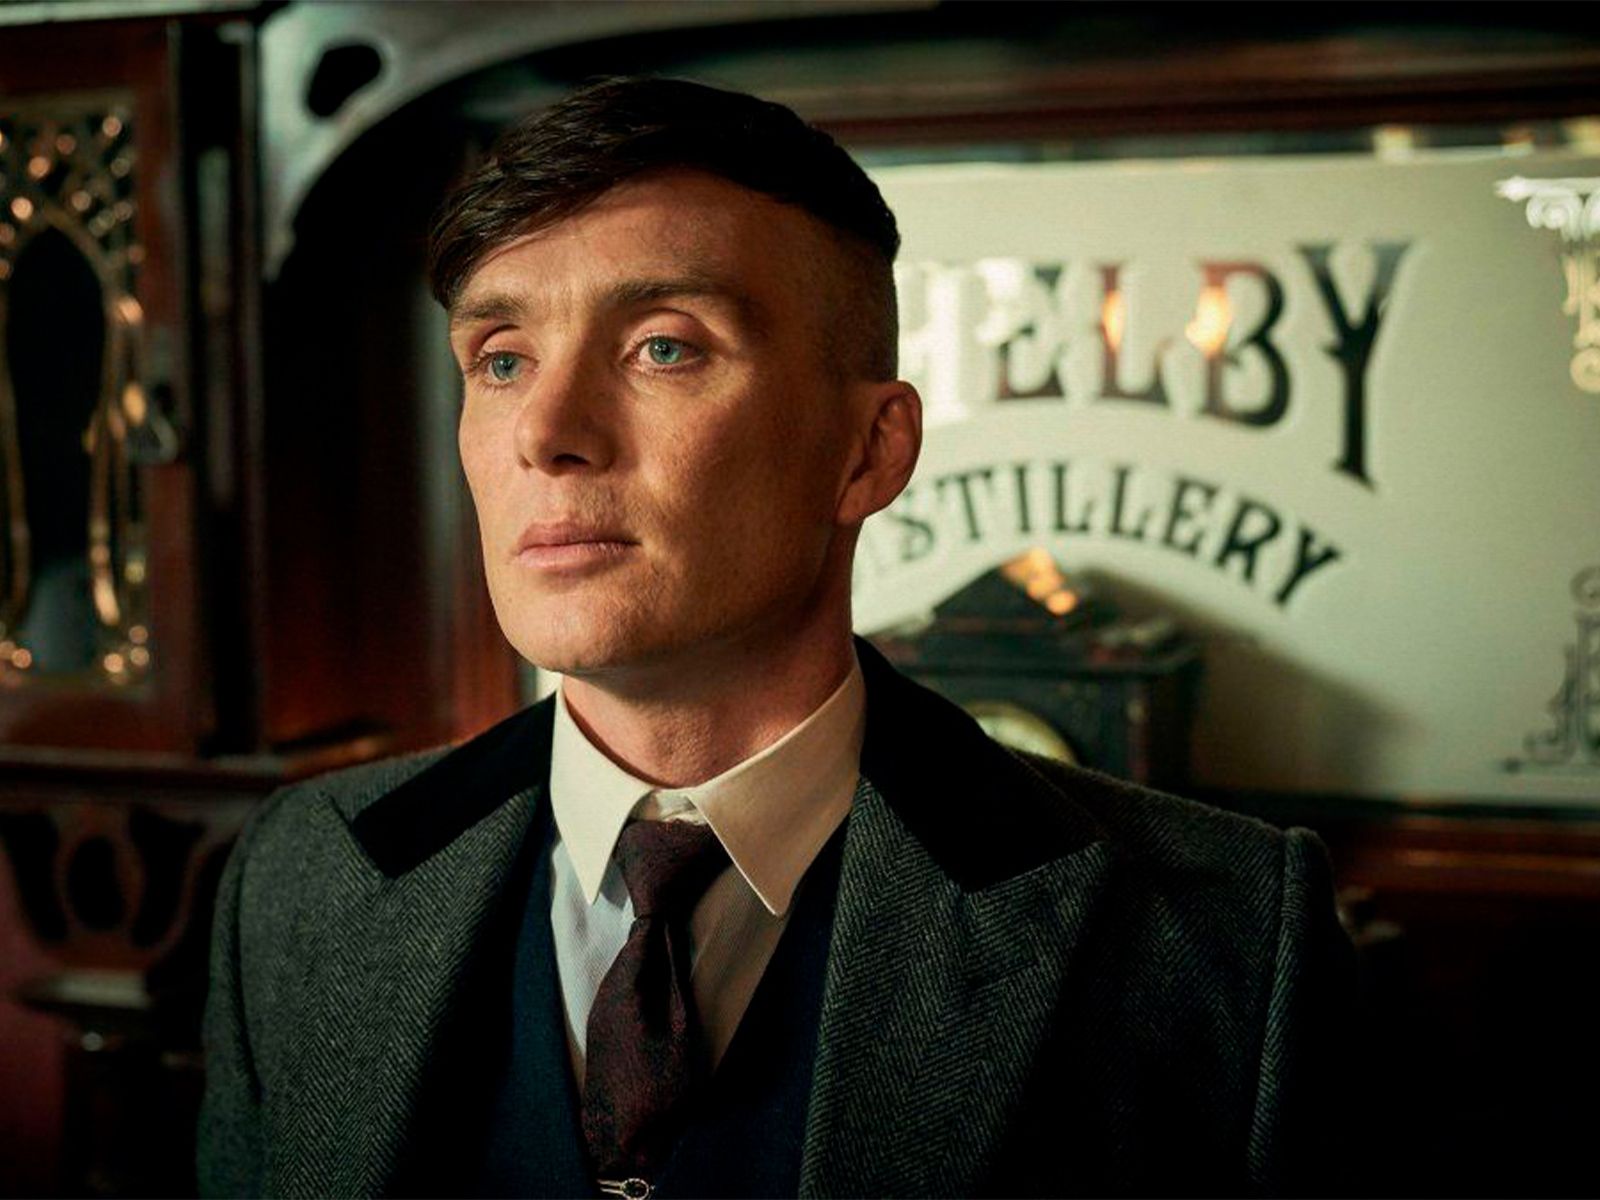 Peaky Blinders announces the date of its world premiere on Netflix